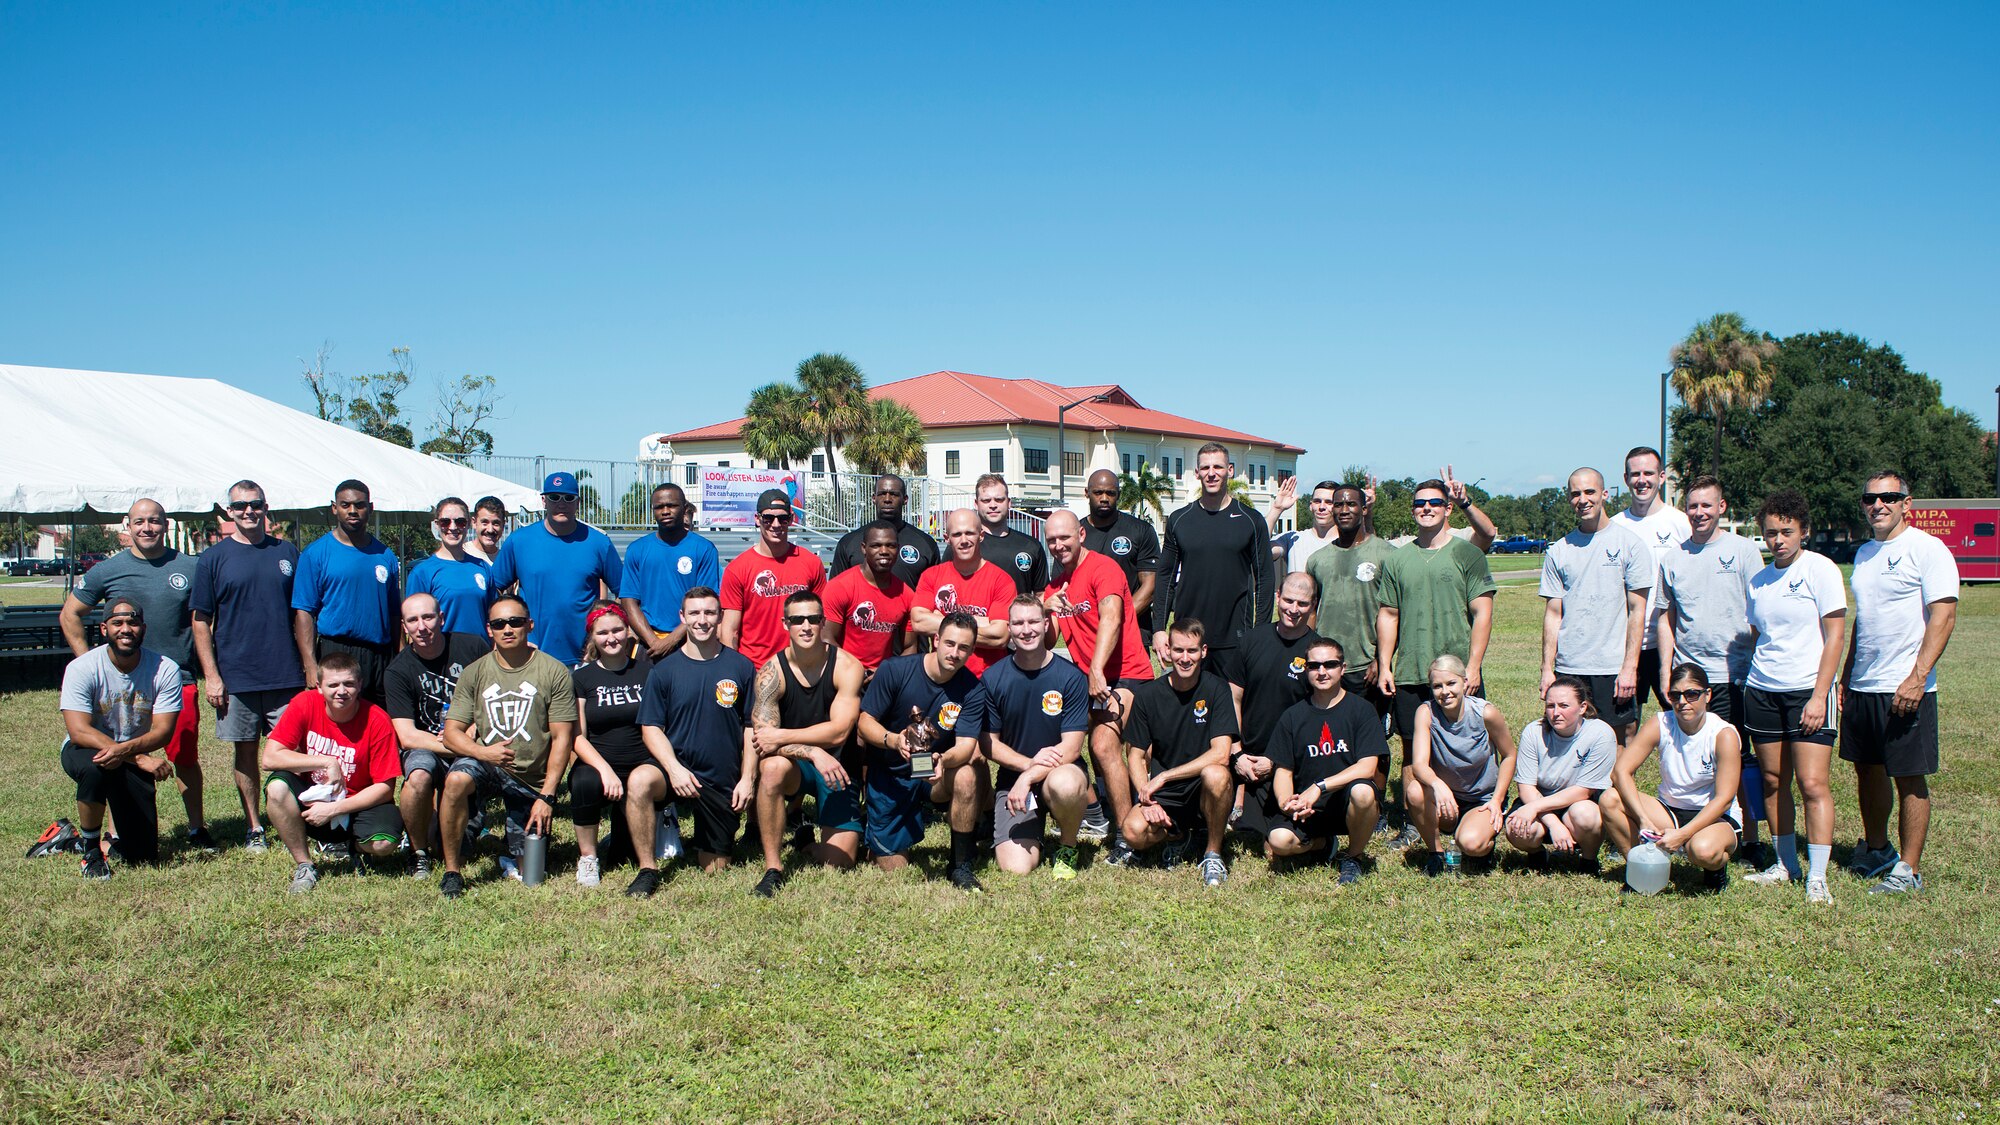 Participants in the 2018 Fire Muster as part of Fire Prevention Week pause for a photo at MacDill Air Force Base, Fla., Oct. 12, 2018.